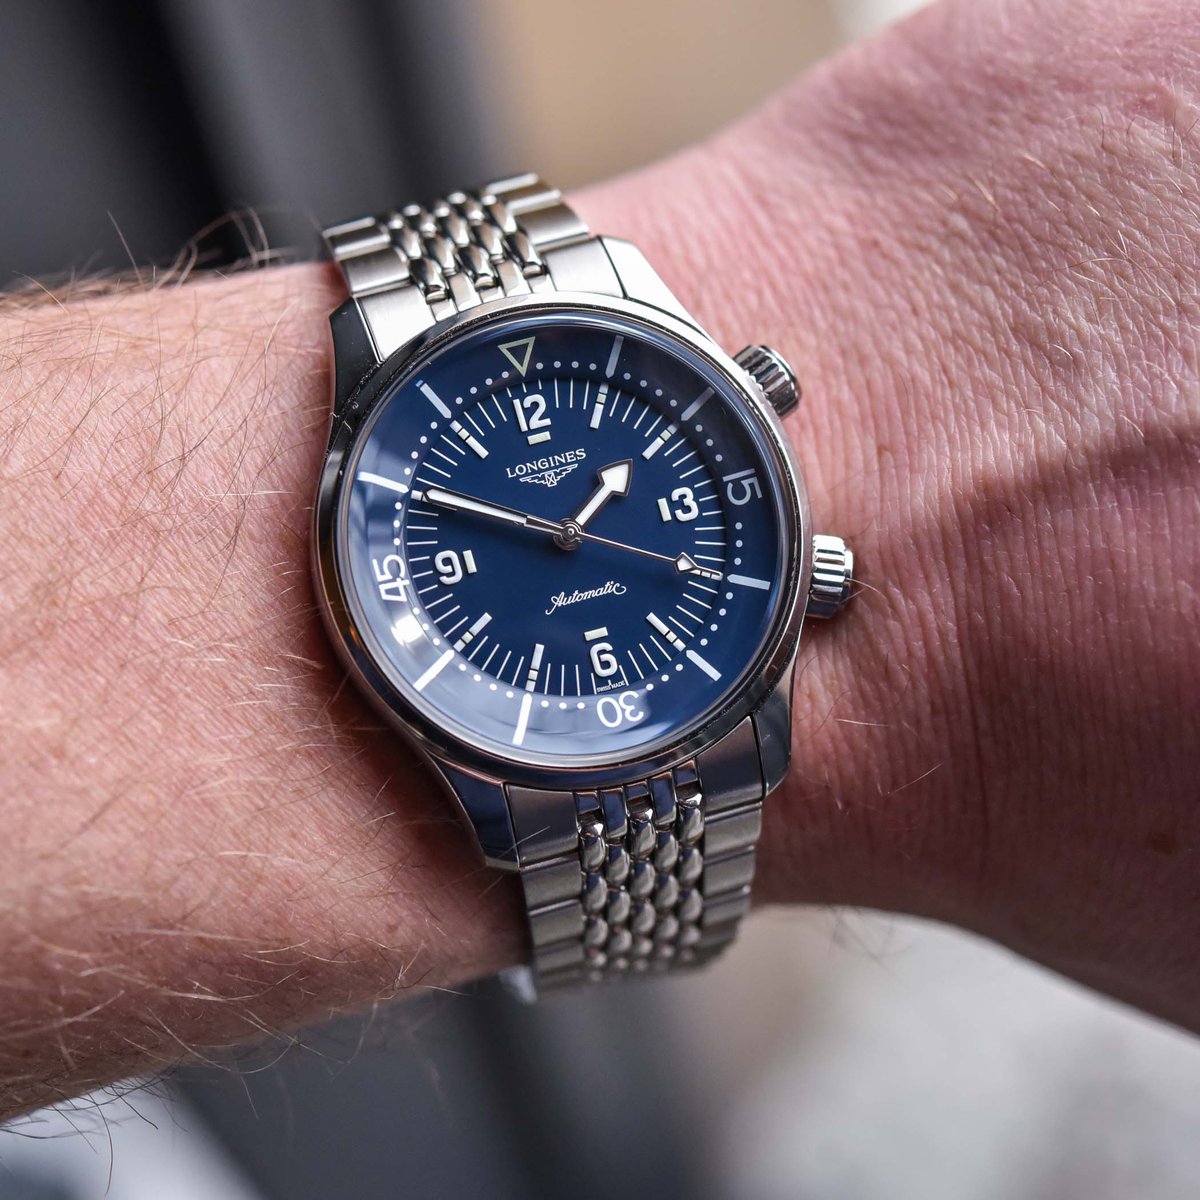 ‘To date, or not to date?’ 🤔 A question not quite as old as time itself, but rather as old as our little watch community. The smaller 39mm @Longines Legend Diver from last year took the second option, and we think it’s for the best. What do you think?